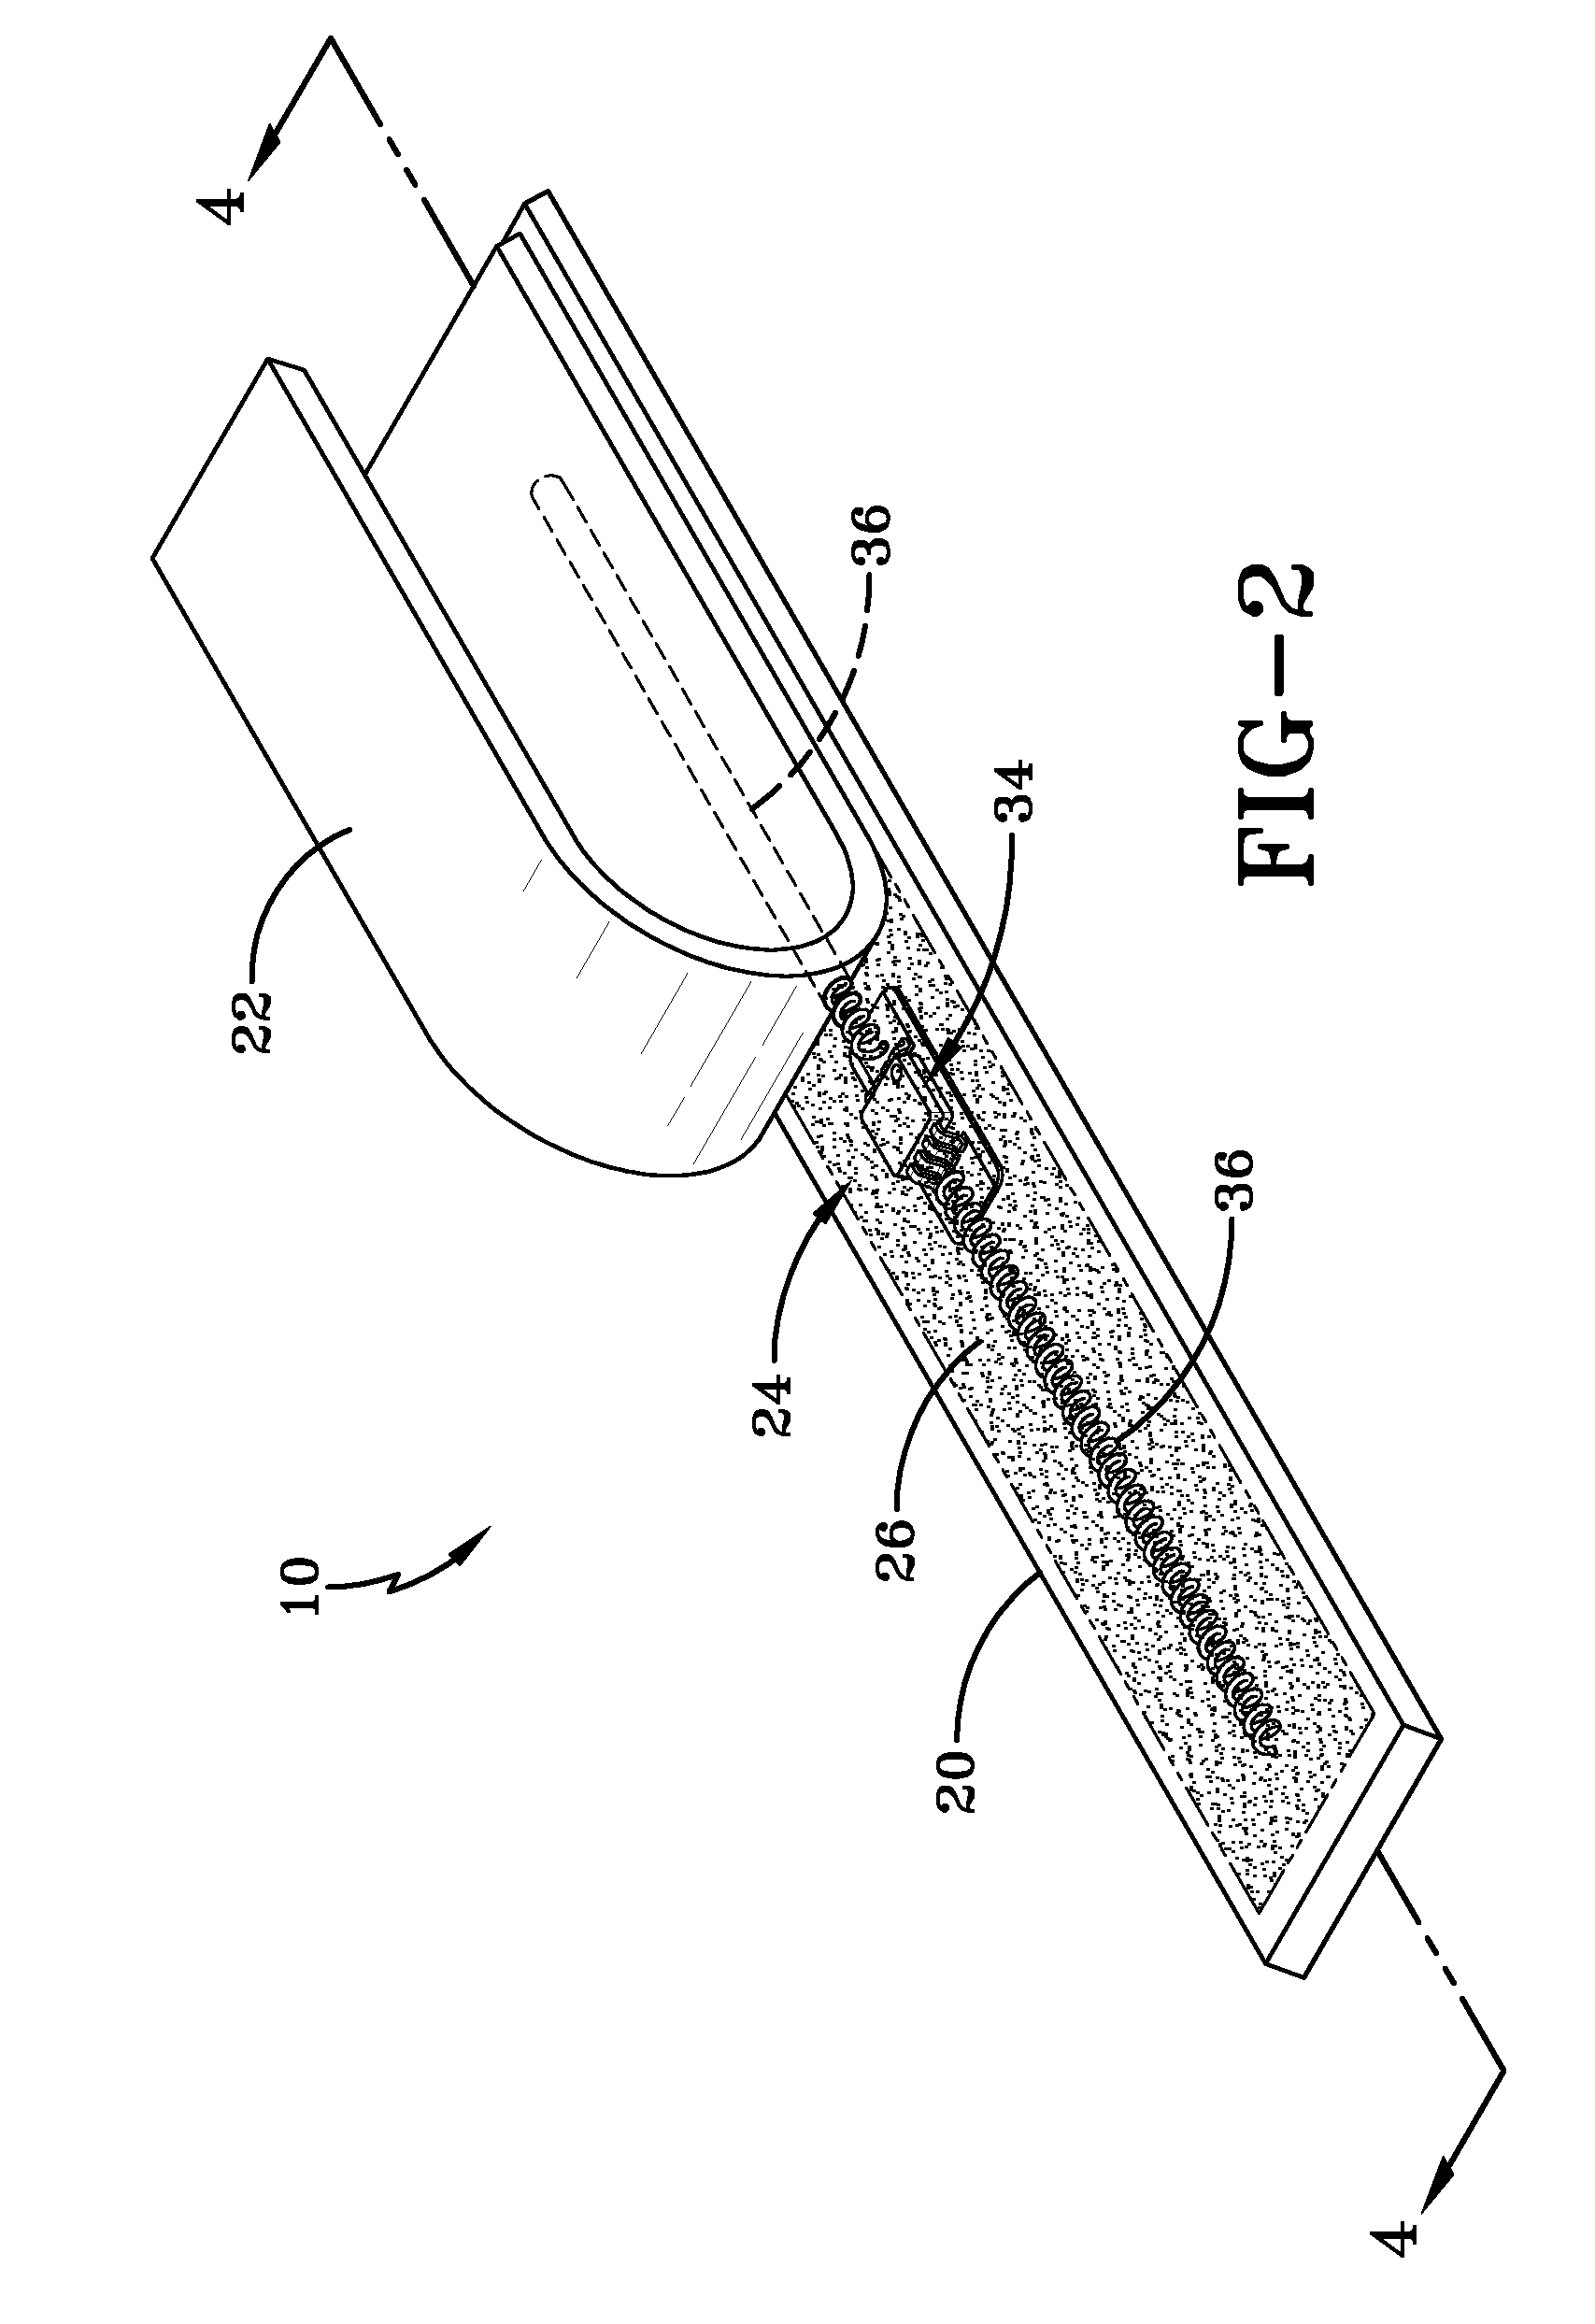 Environmentally resistant assembly containing an electronic device for use in a tire